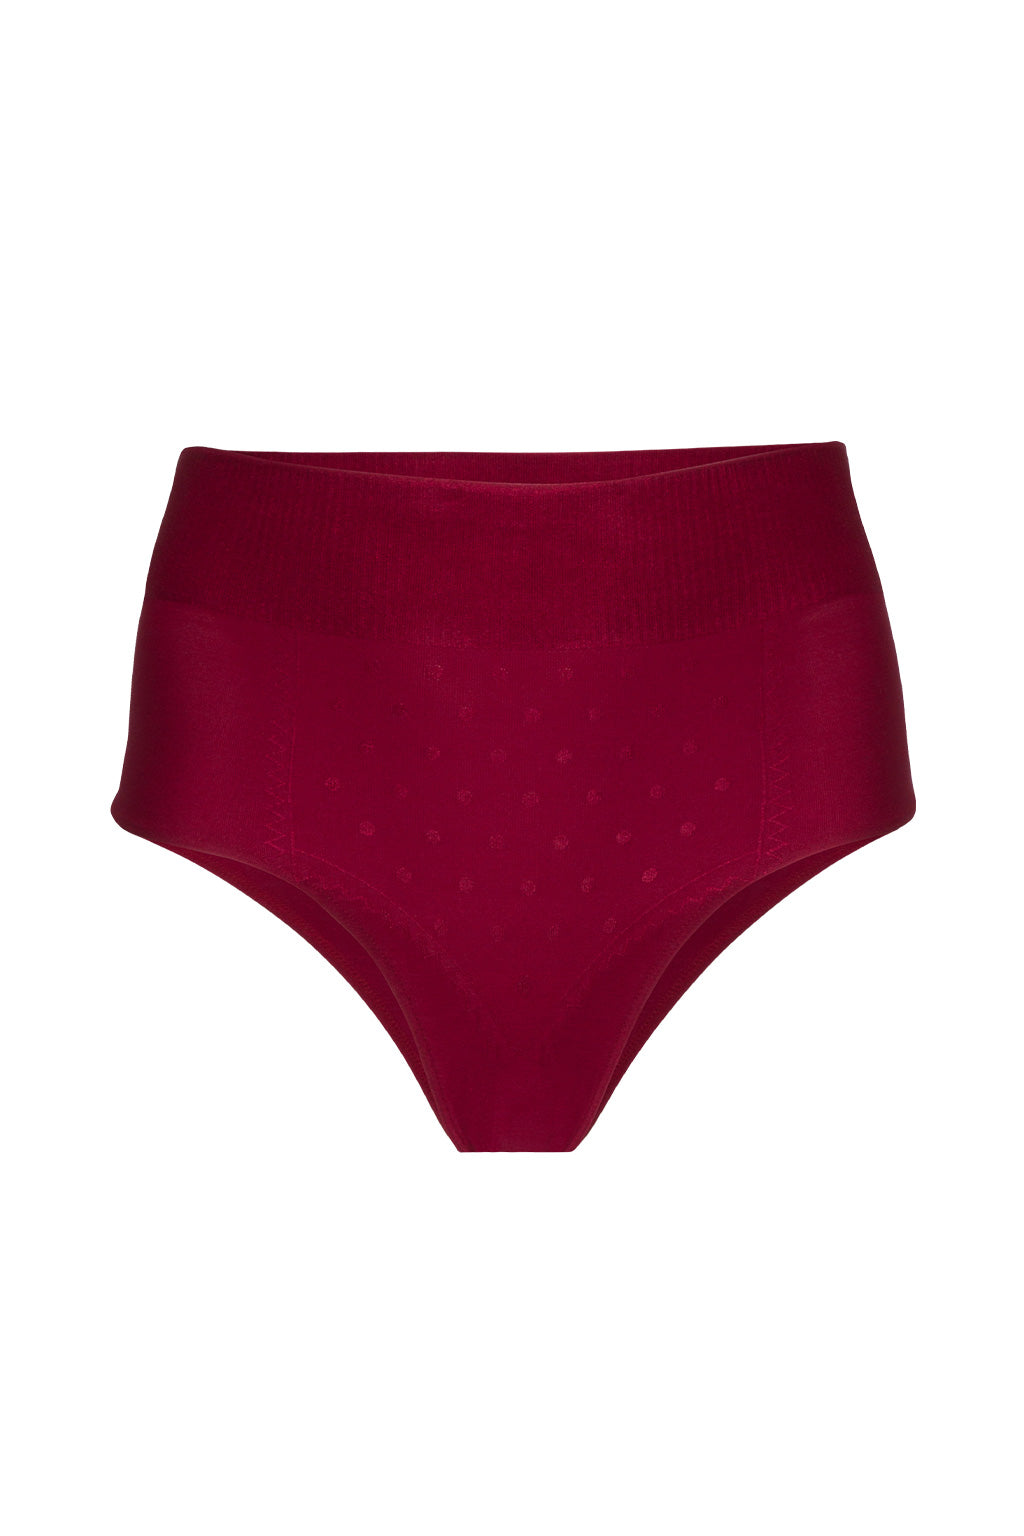 Classico high-waisted panties red